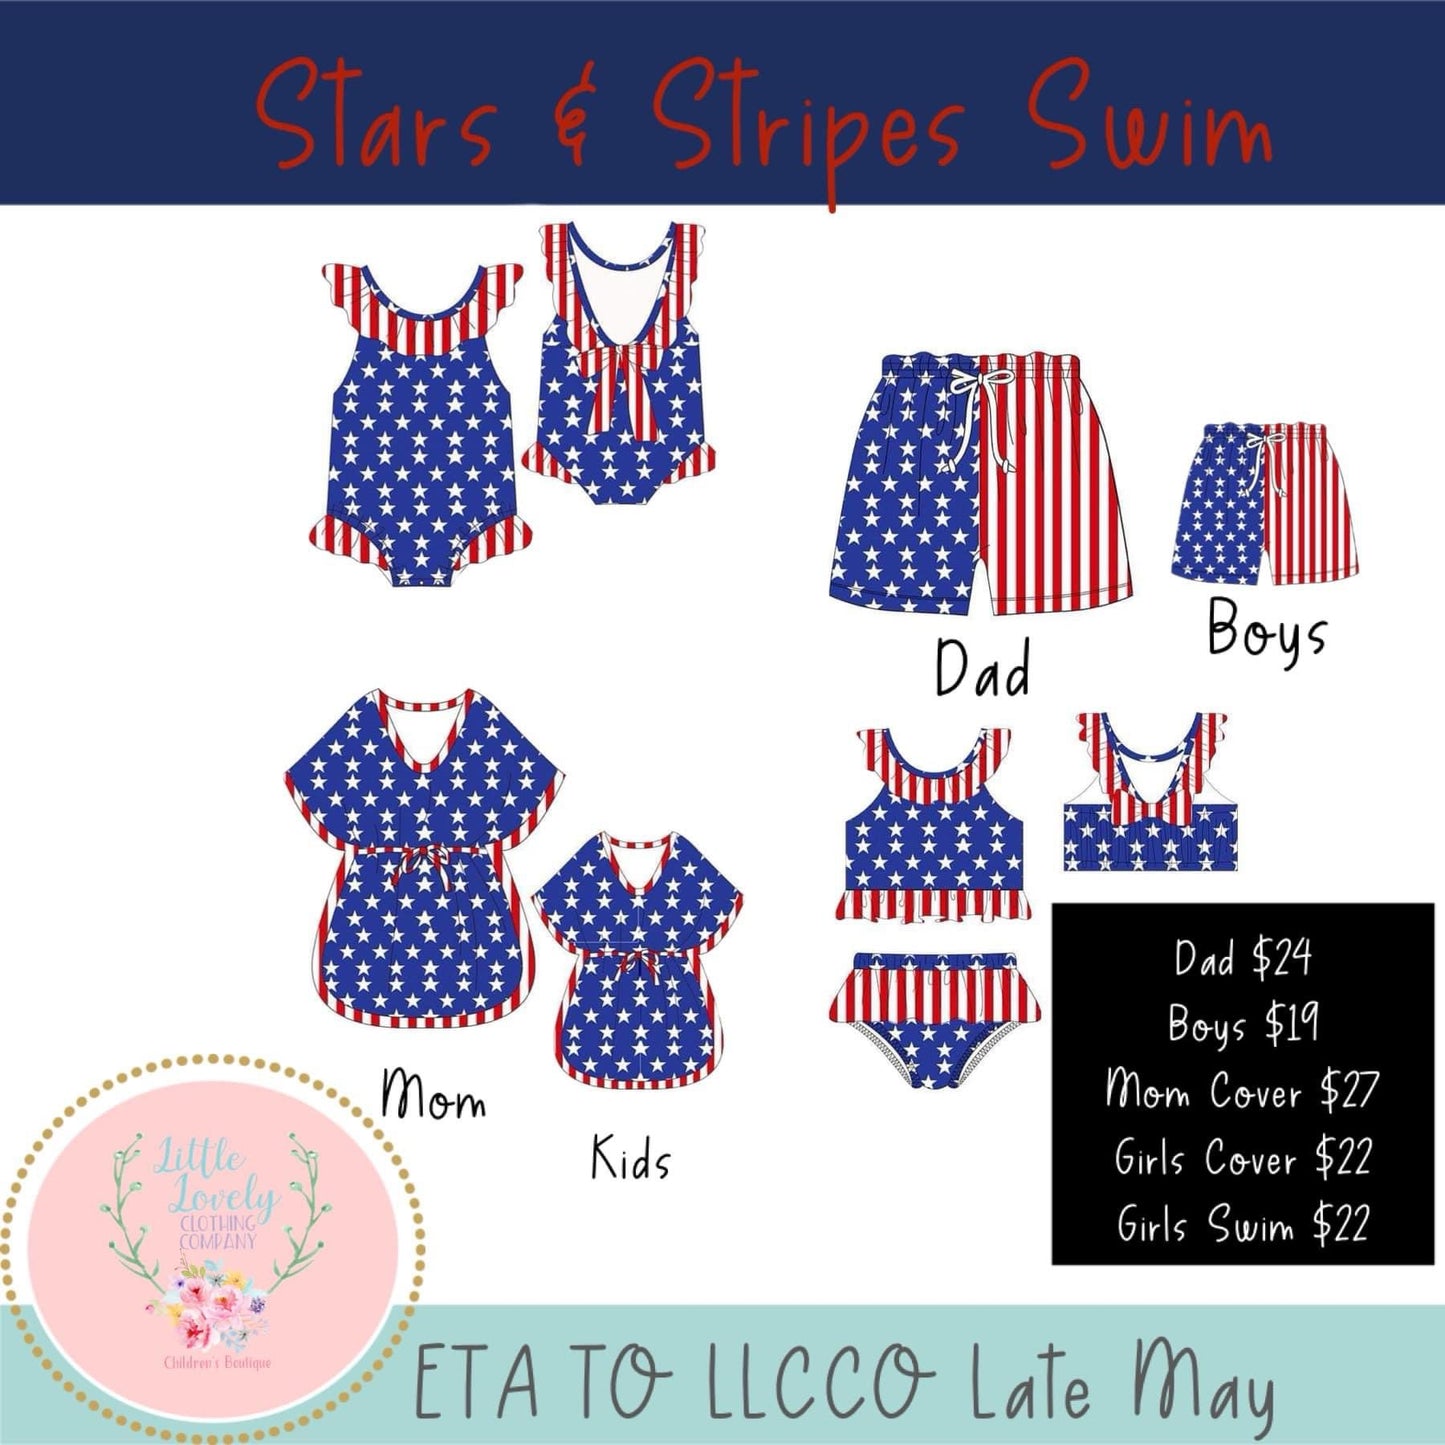 Stars & Stripes Swim Collection (KIDS STYLES), Presale ETA: Late May to LLCCO, then to customers